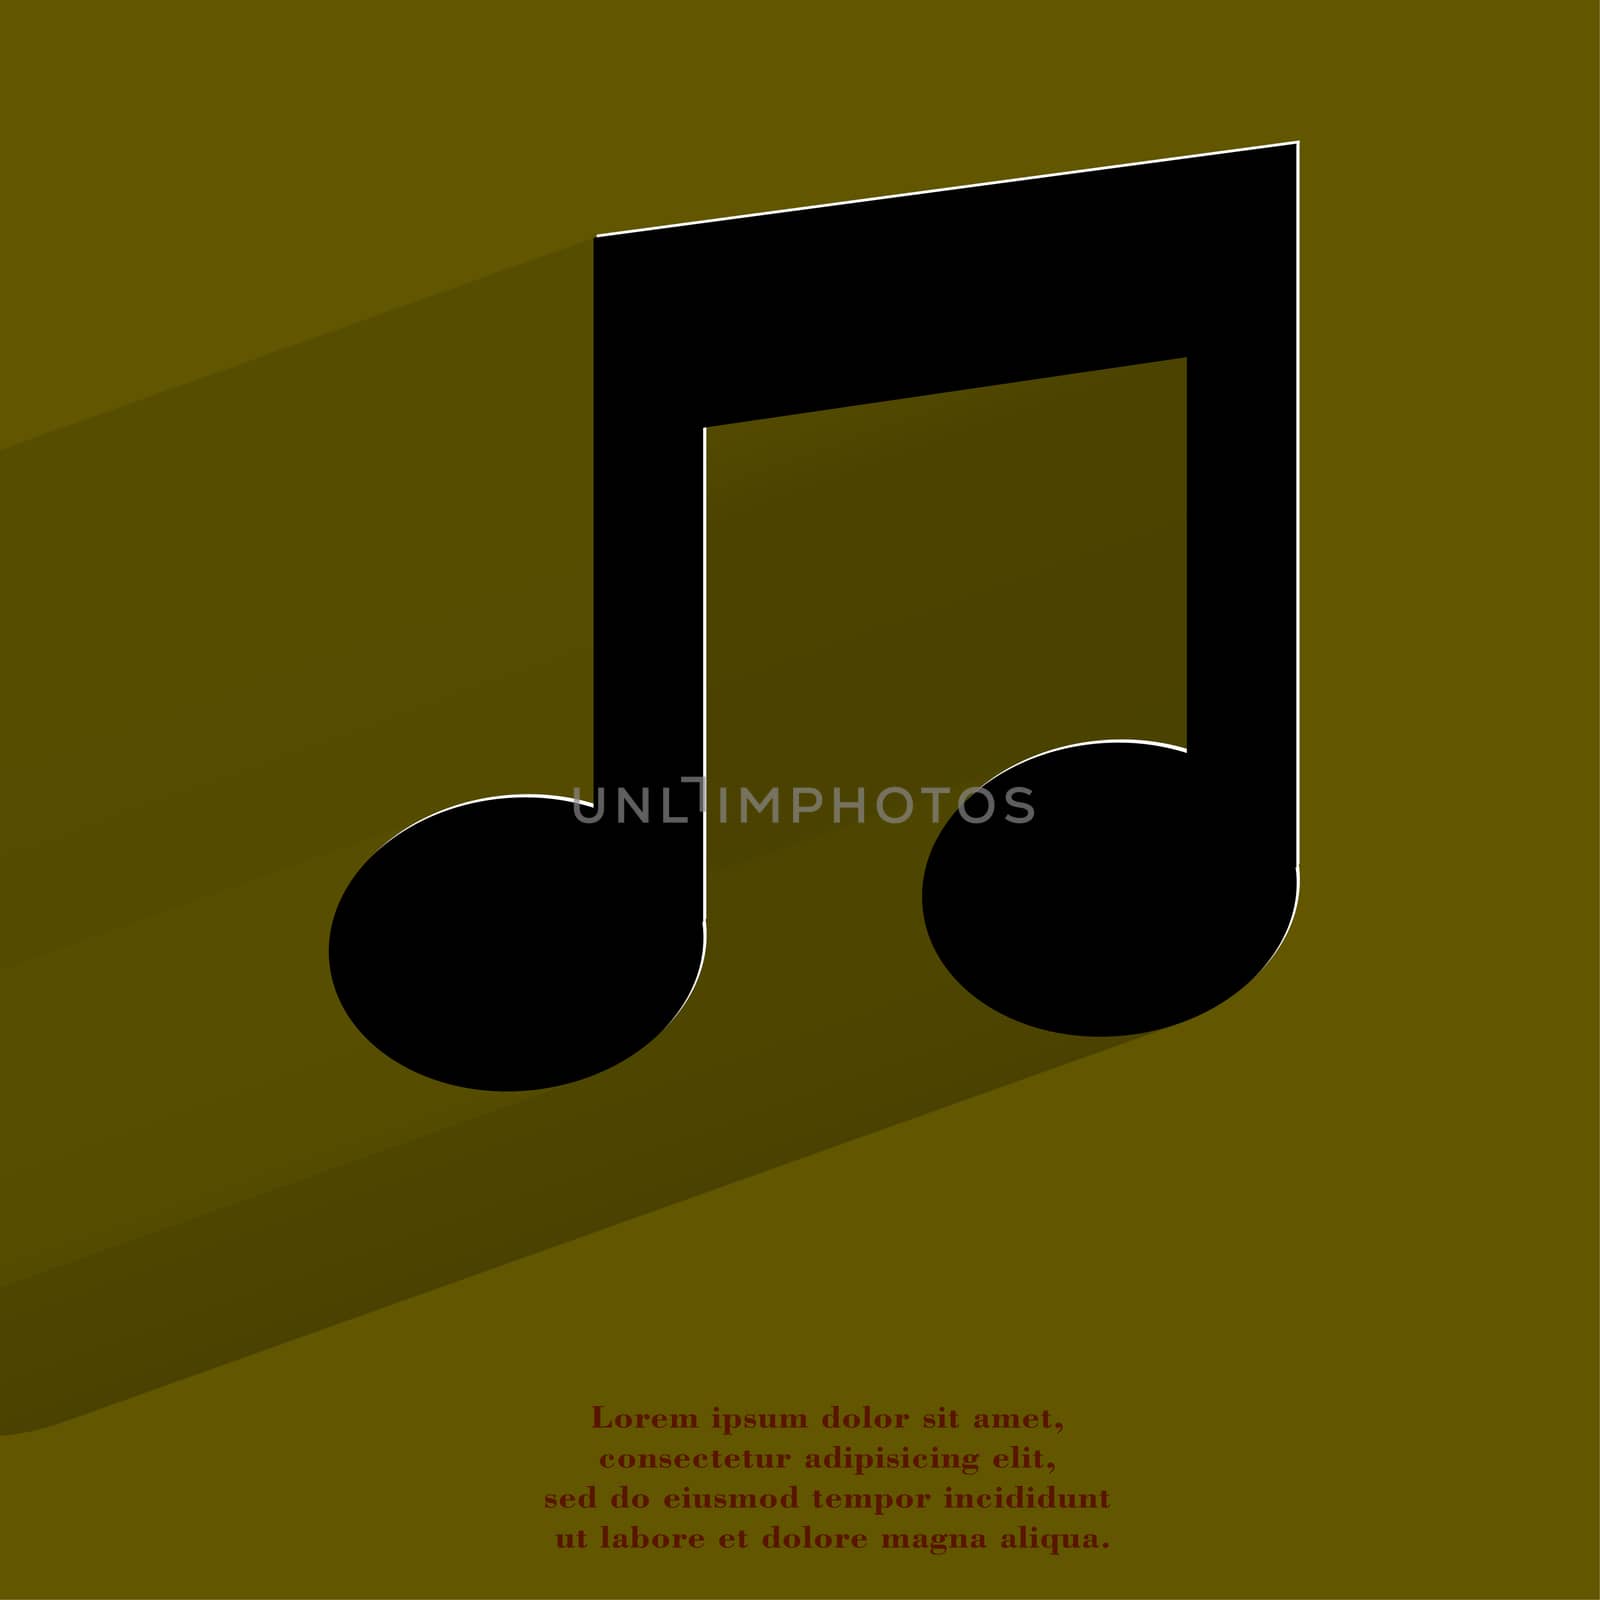 Music note. Flat modern web button with long shadow and space for your text. . 